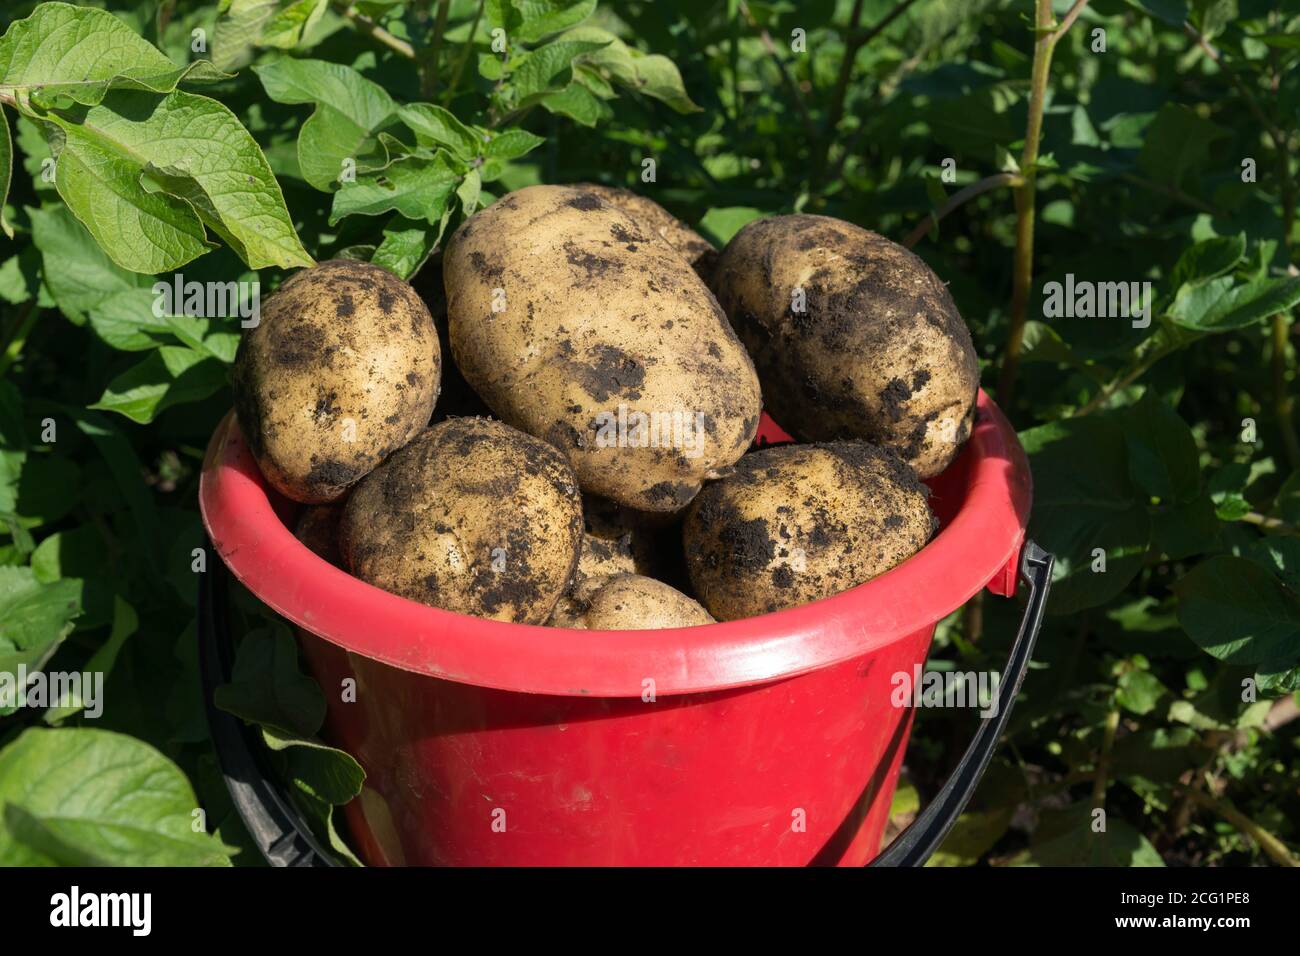 A red plastic bucket stands filled with white potatoes among green potato haulm. Close-up. Stock Photo